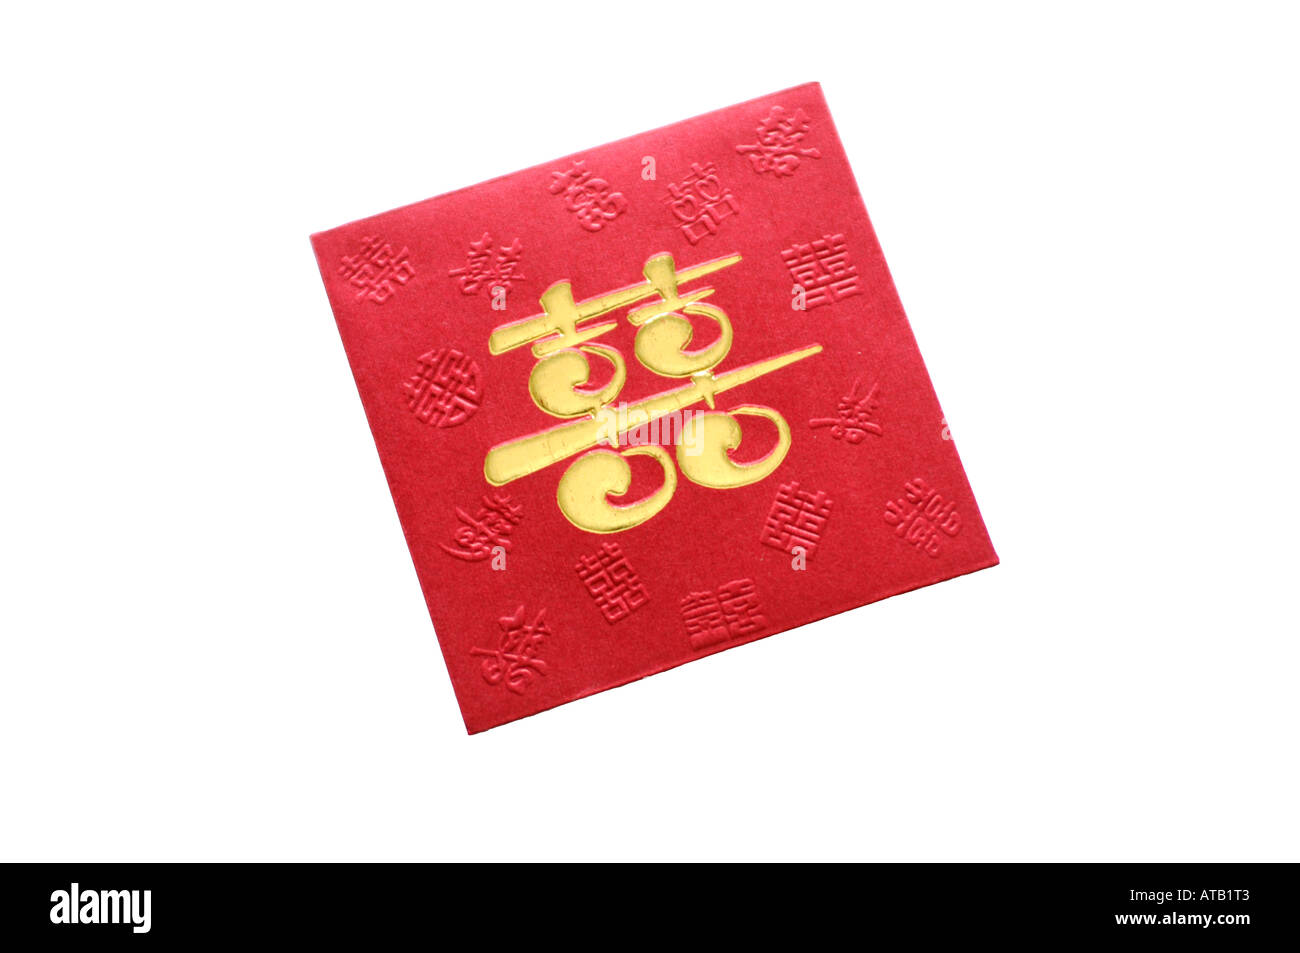 Chinese Double Happiness Red Envelopes